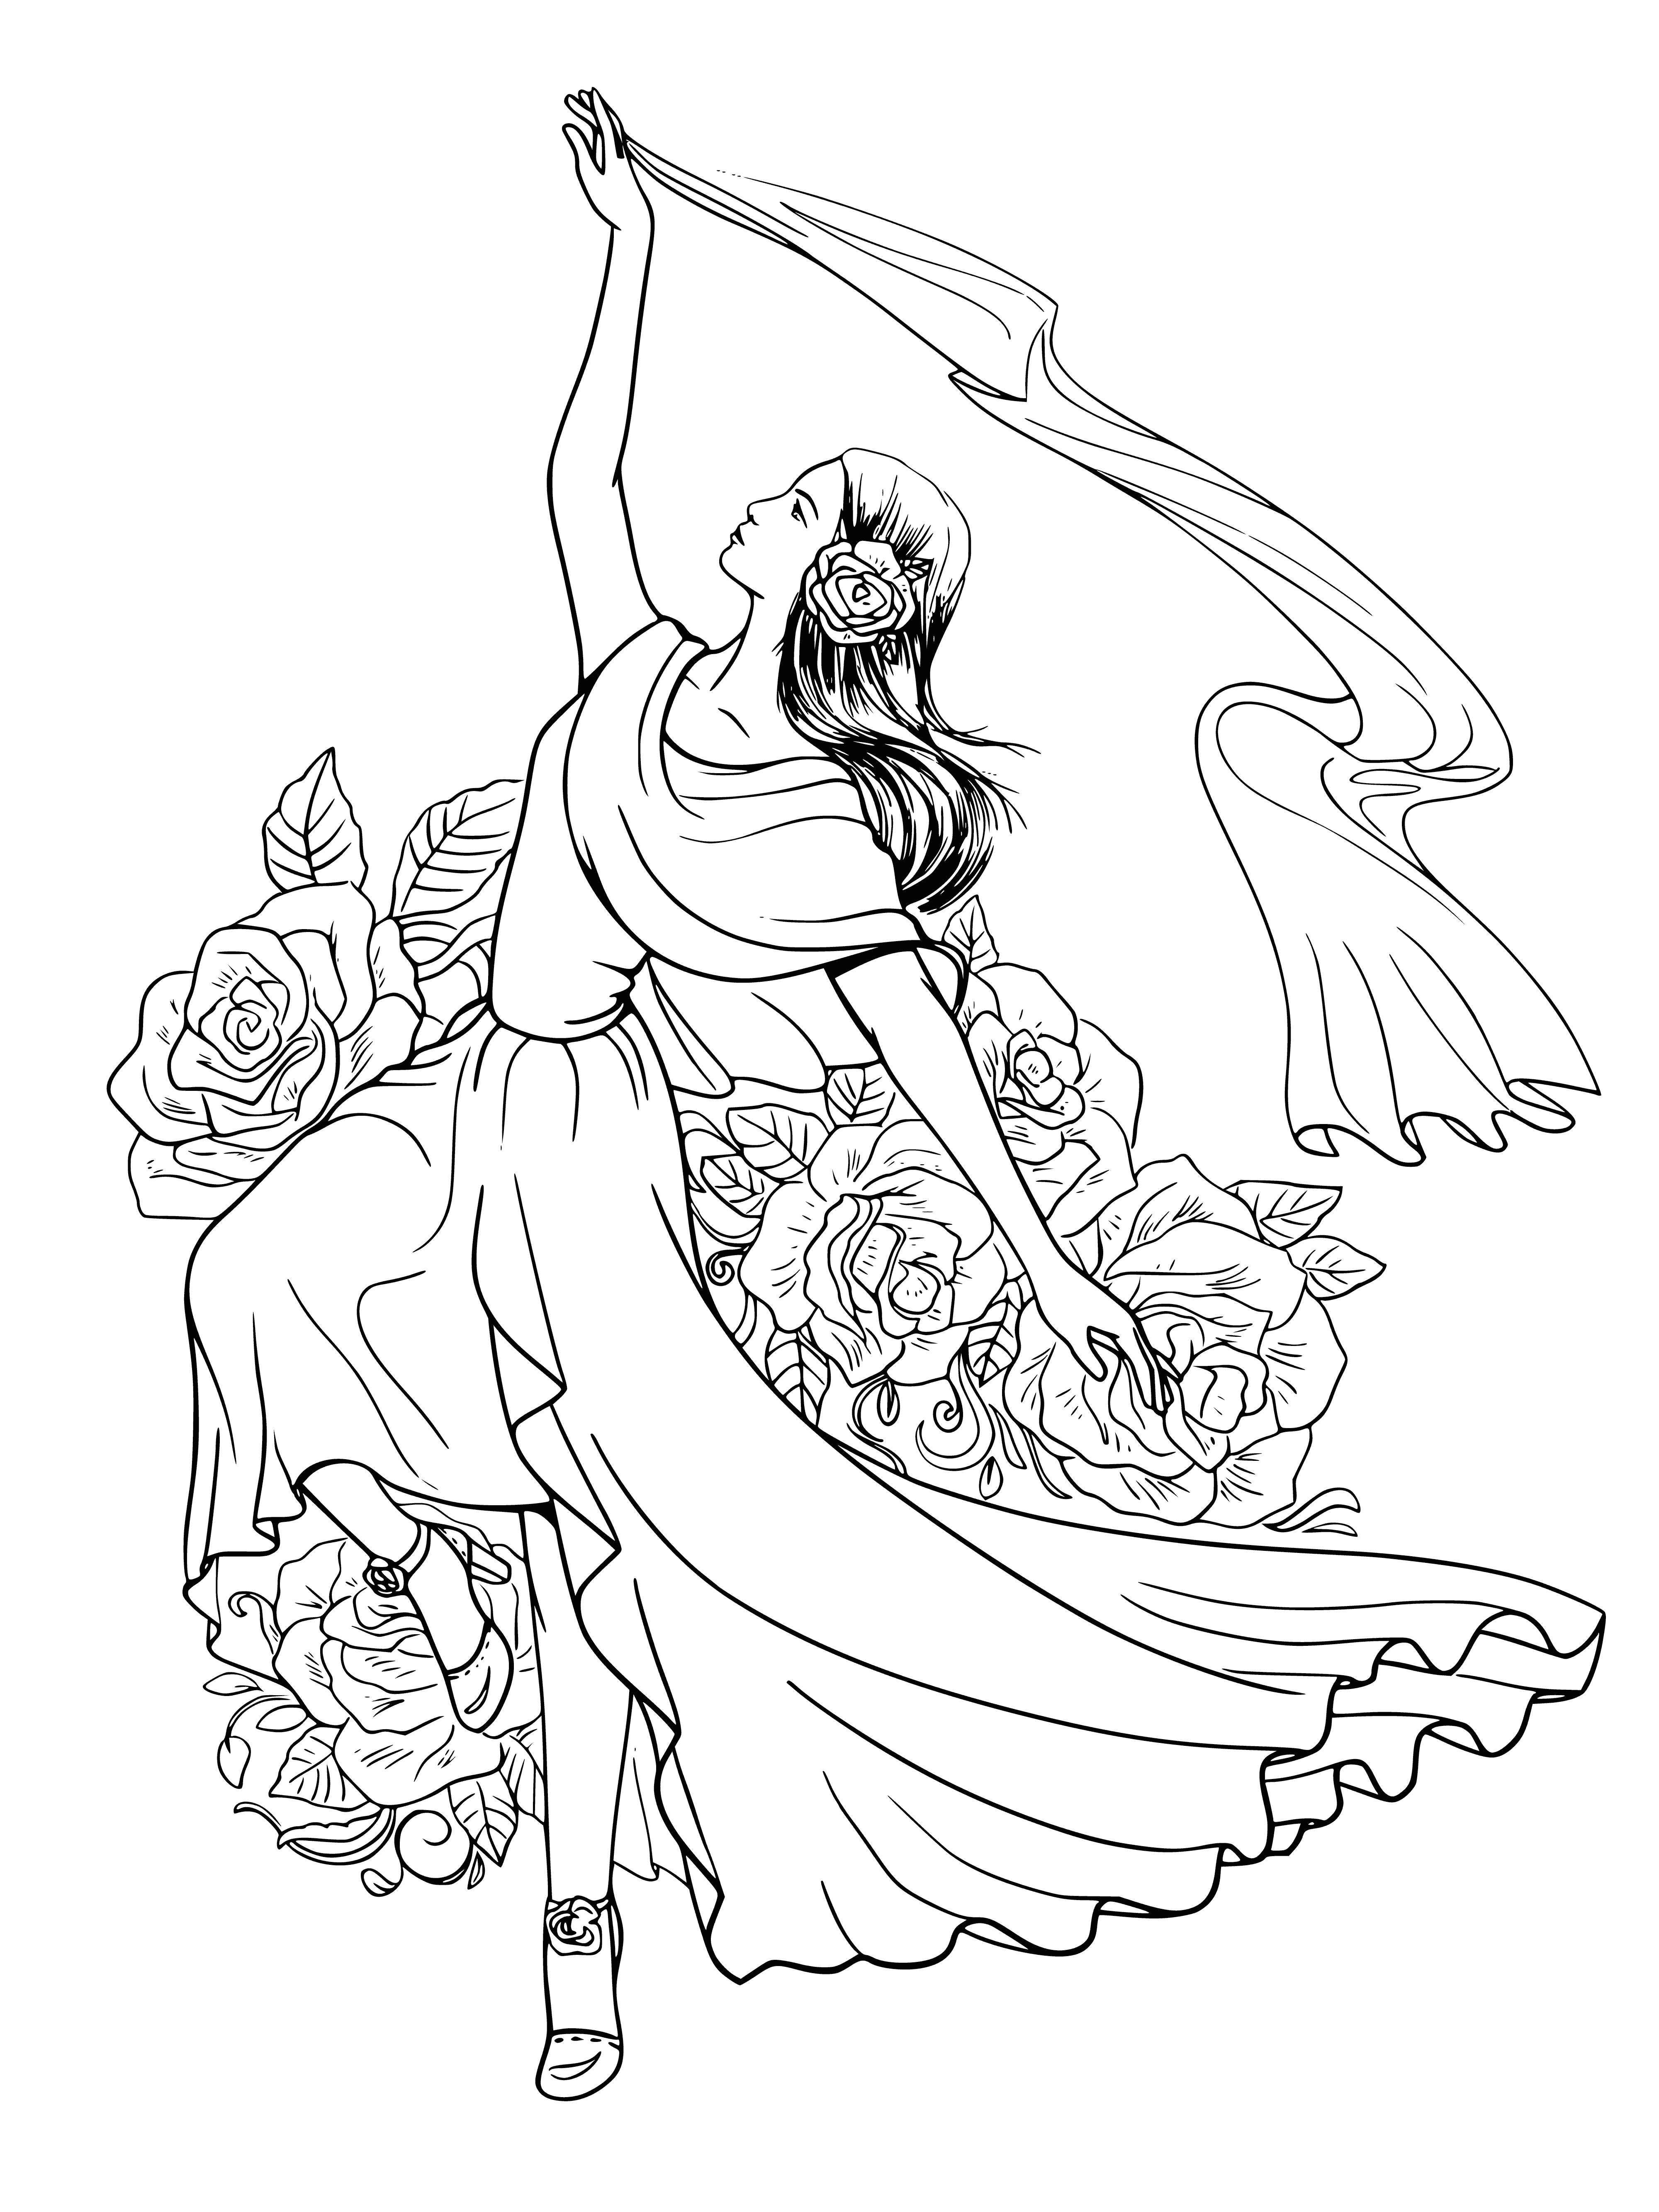 coloring page: 2 girls dancing & enjoying colorful dresses, huge smiles on their faces showing they're having a great time. #happiness